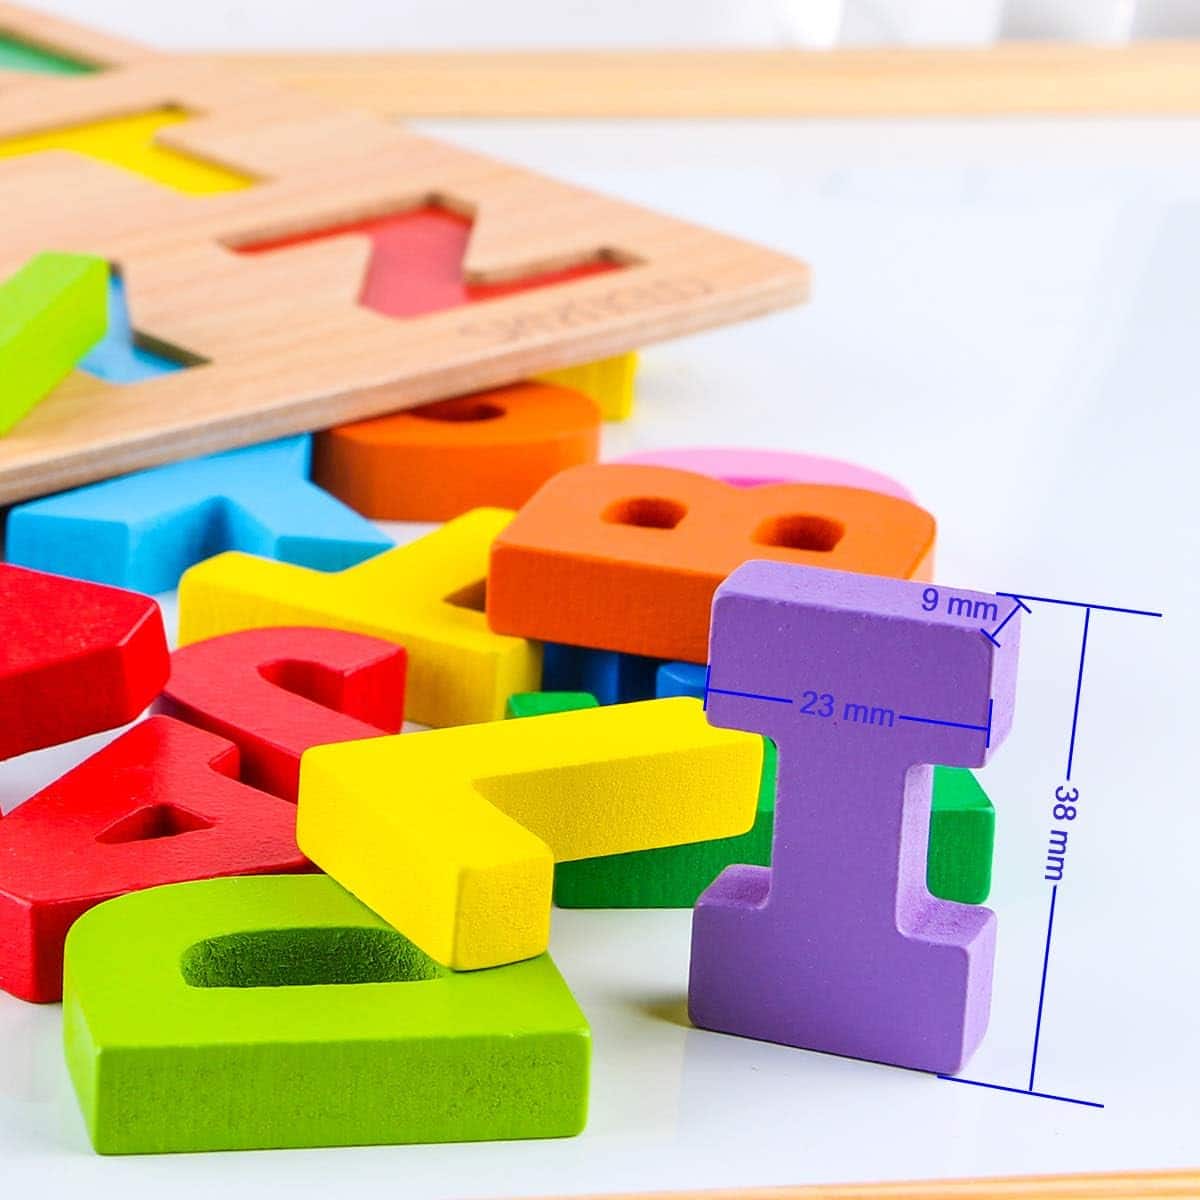 SKYFIELD Wooden Alphabet Puzzles: A Fun and Educational Toy for Kids